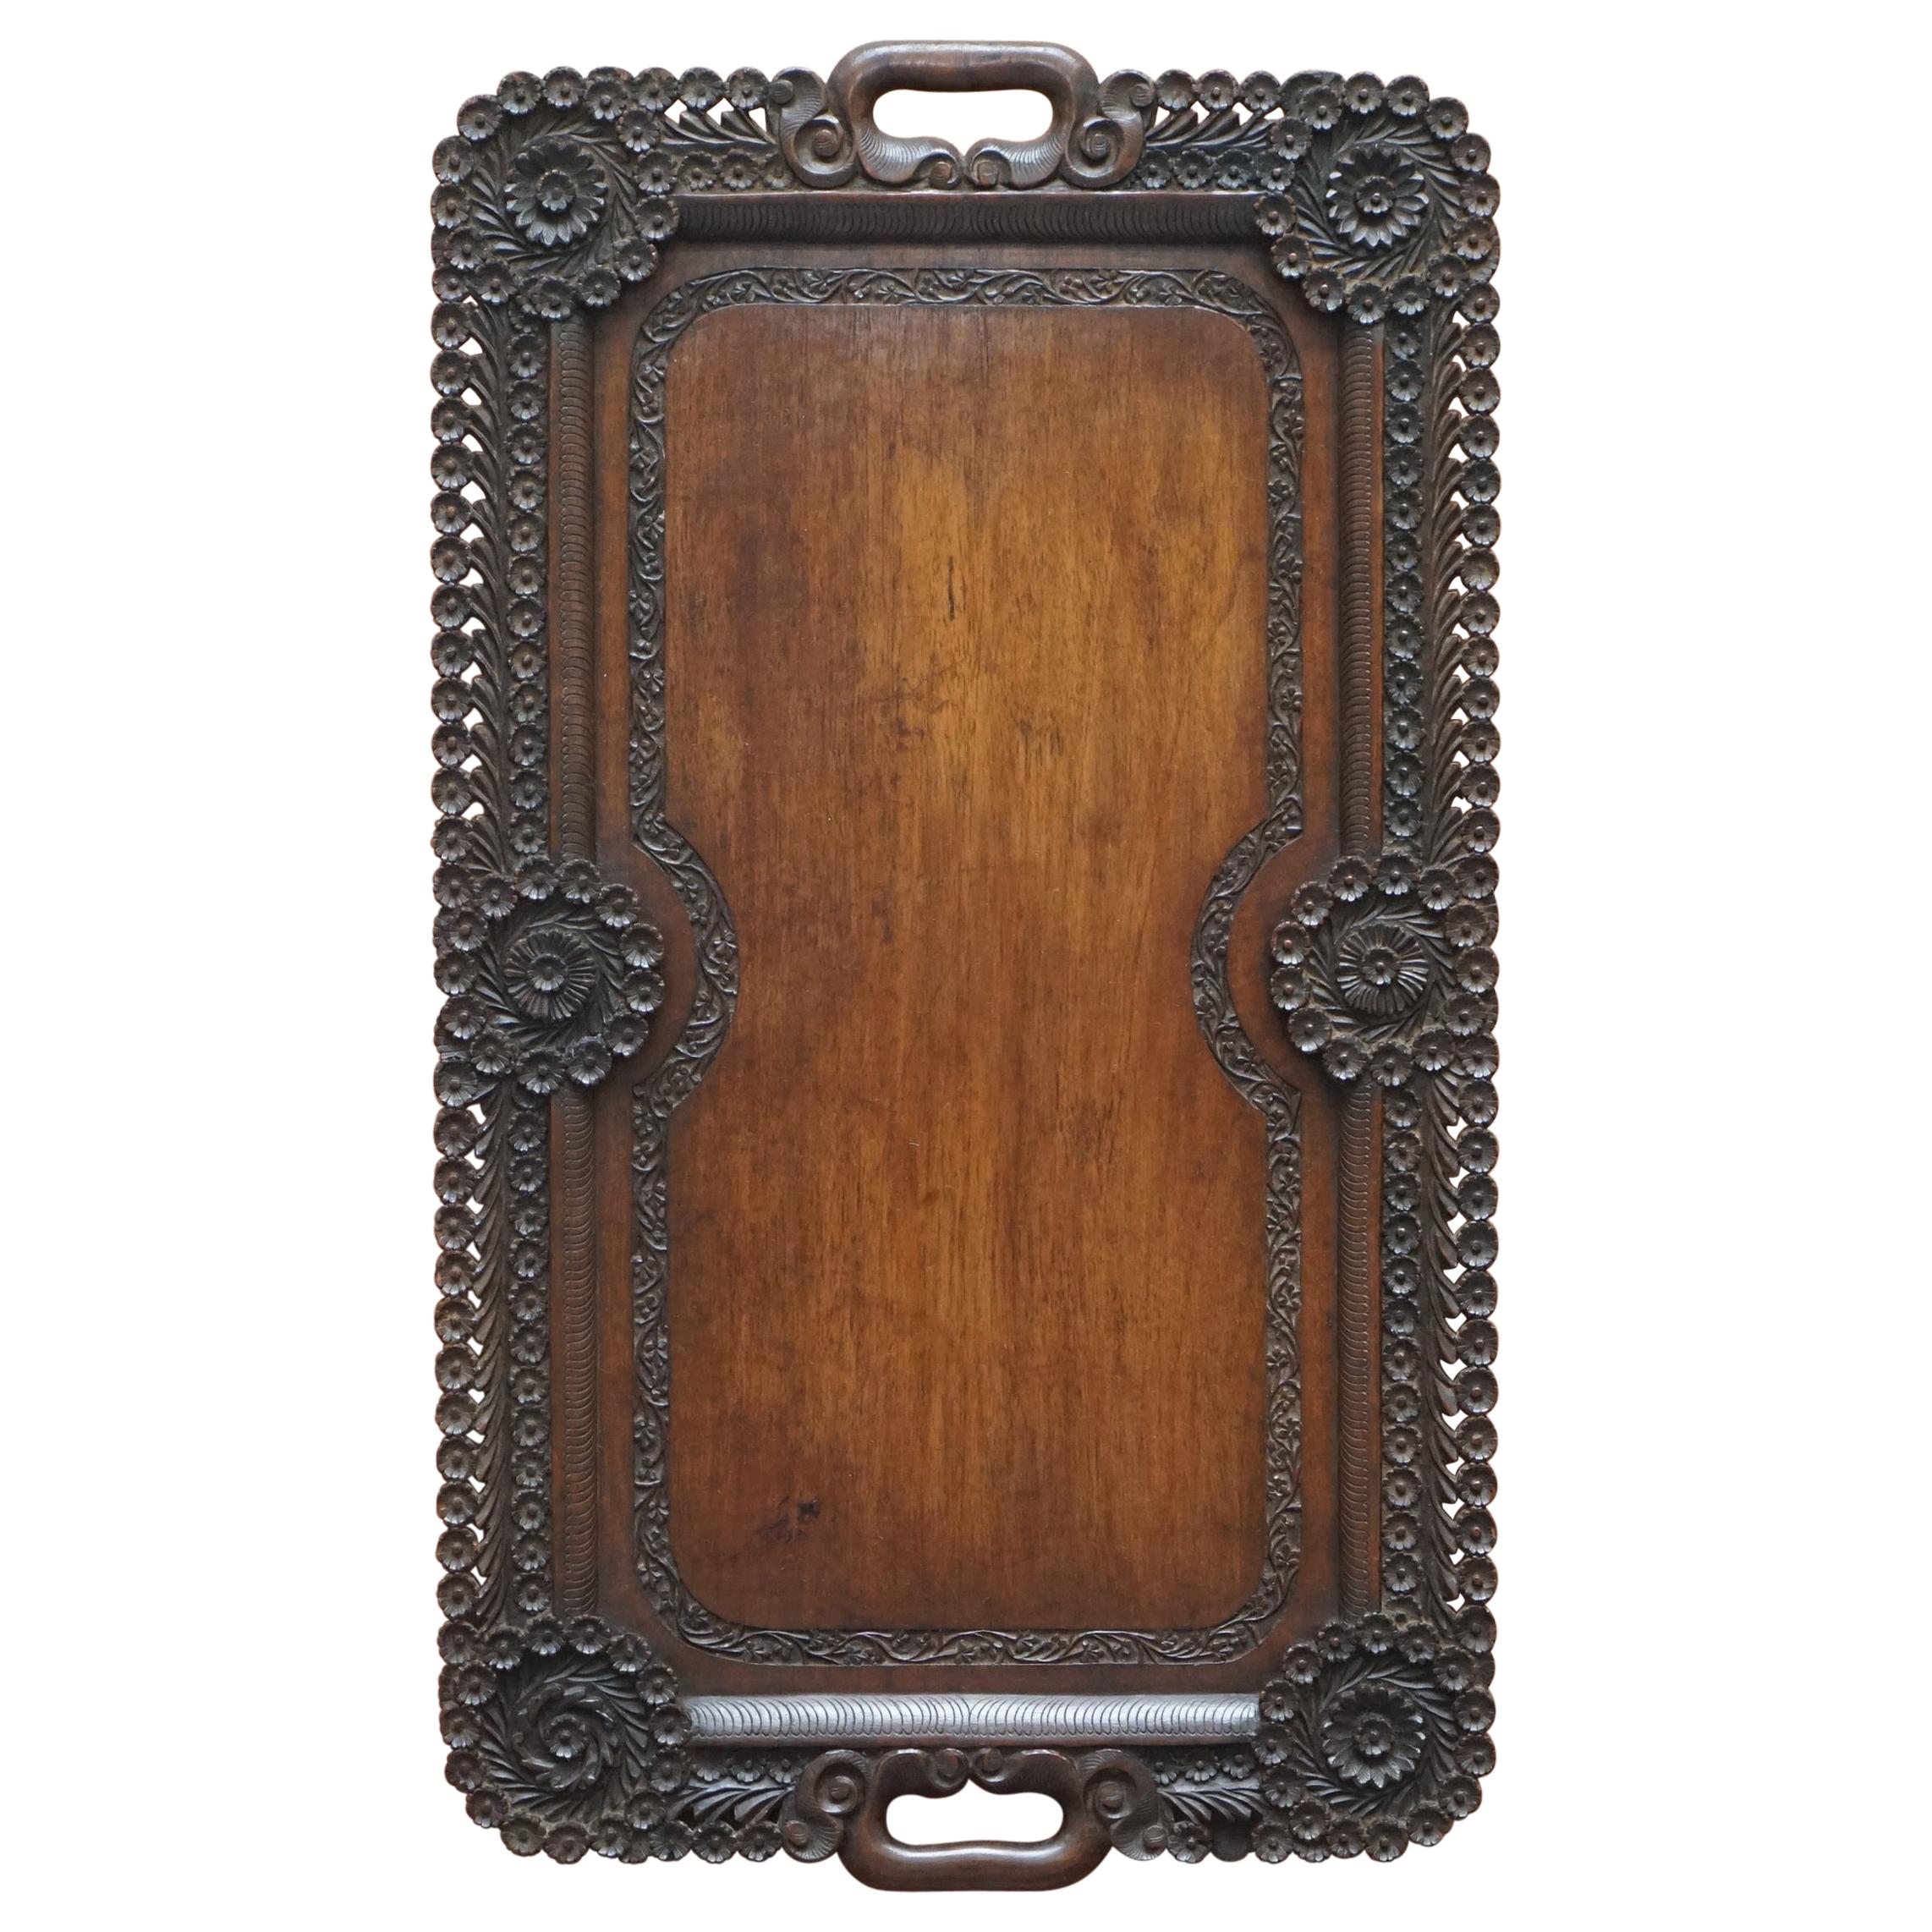 Lovely circa 1900 Anglo-Indian Hand Carved Burmese Wood Serving Tray